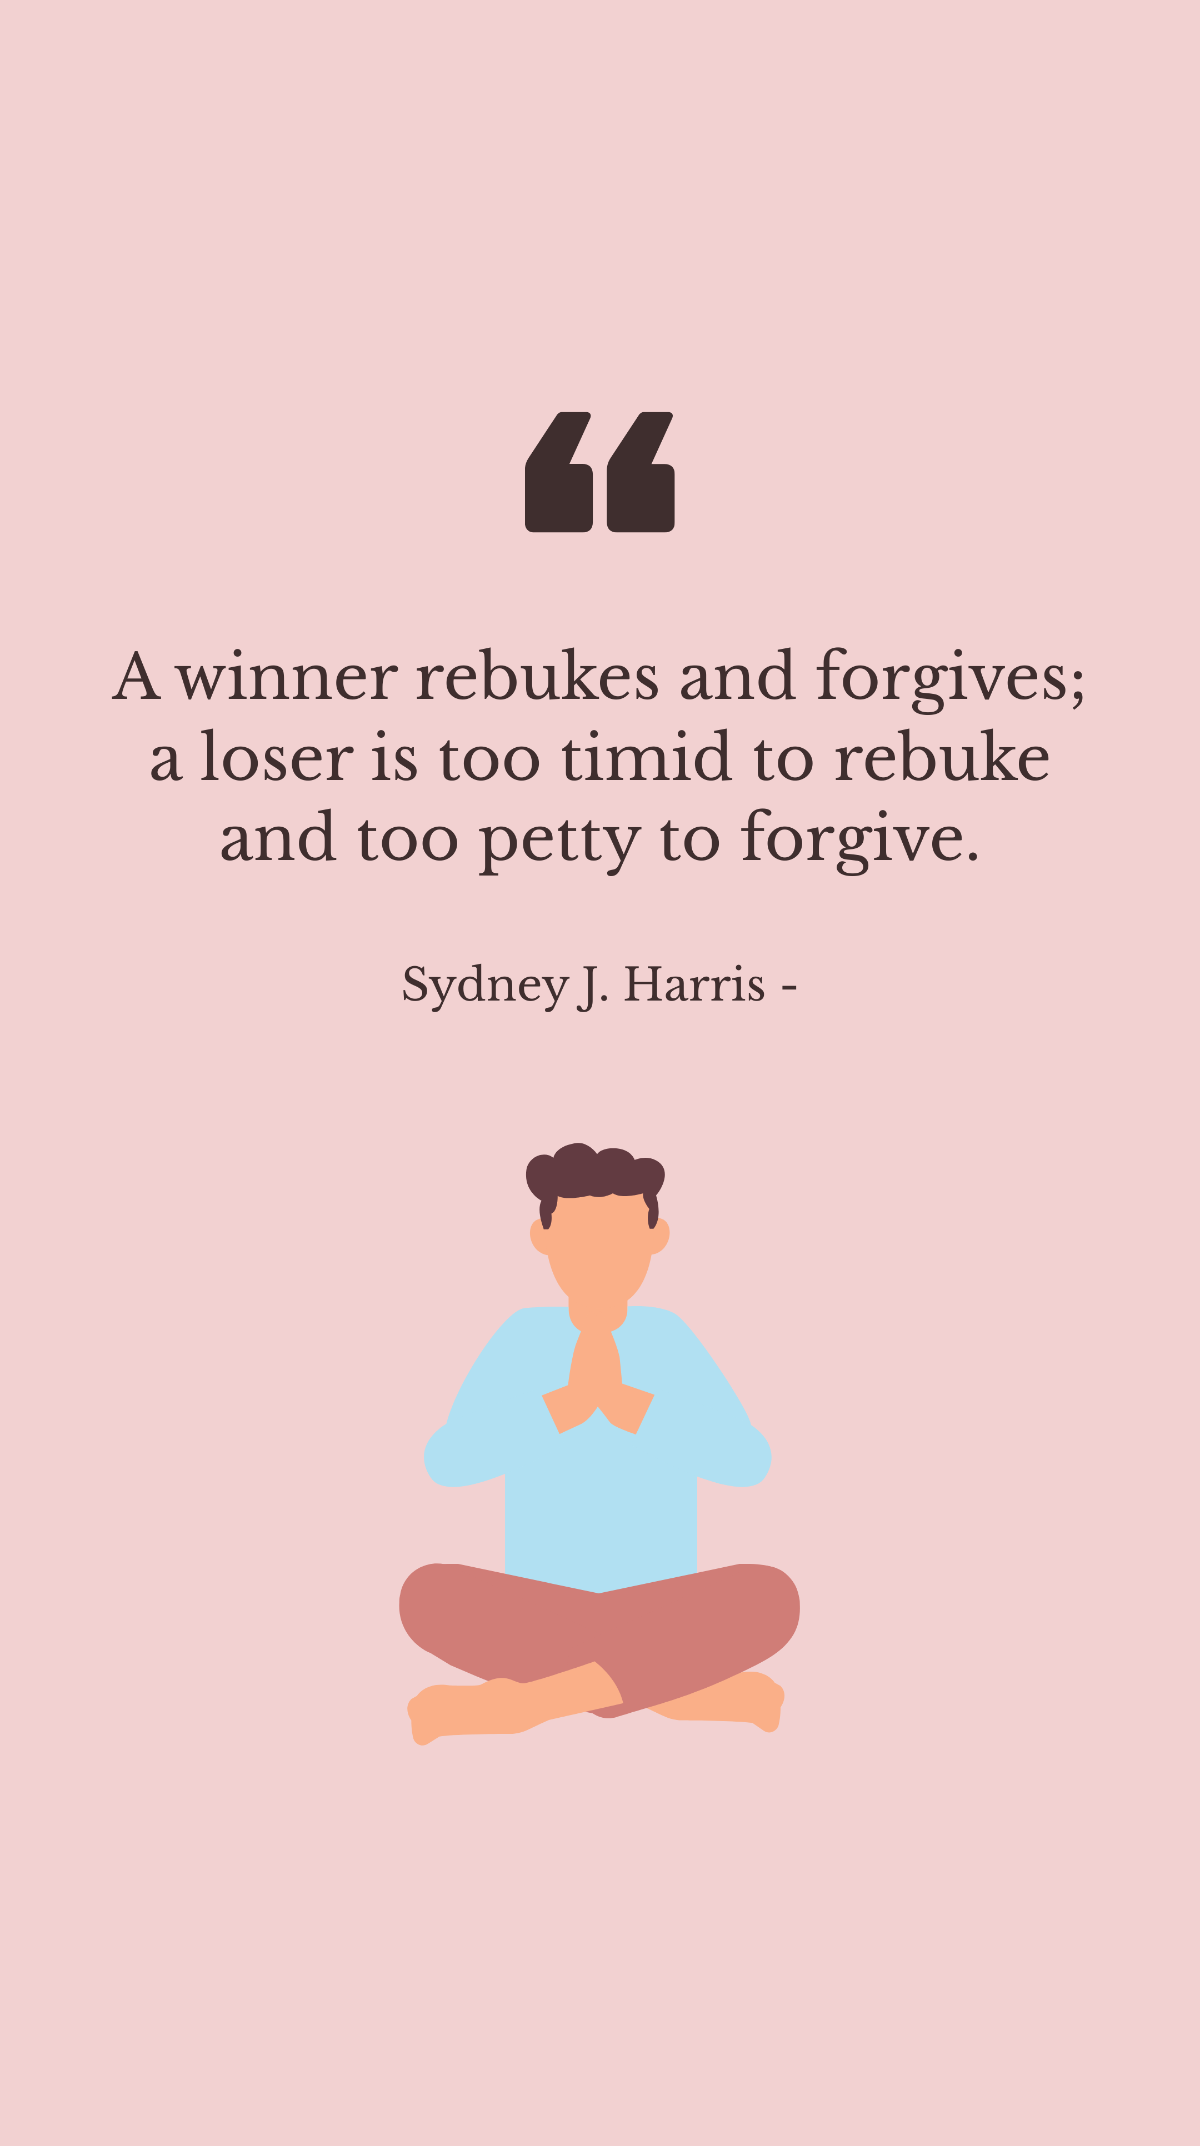 Sydney J. Harris - A winner rebukes and forgives; a loser is too timid to rebuke and too petty to forgive. Template